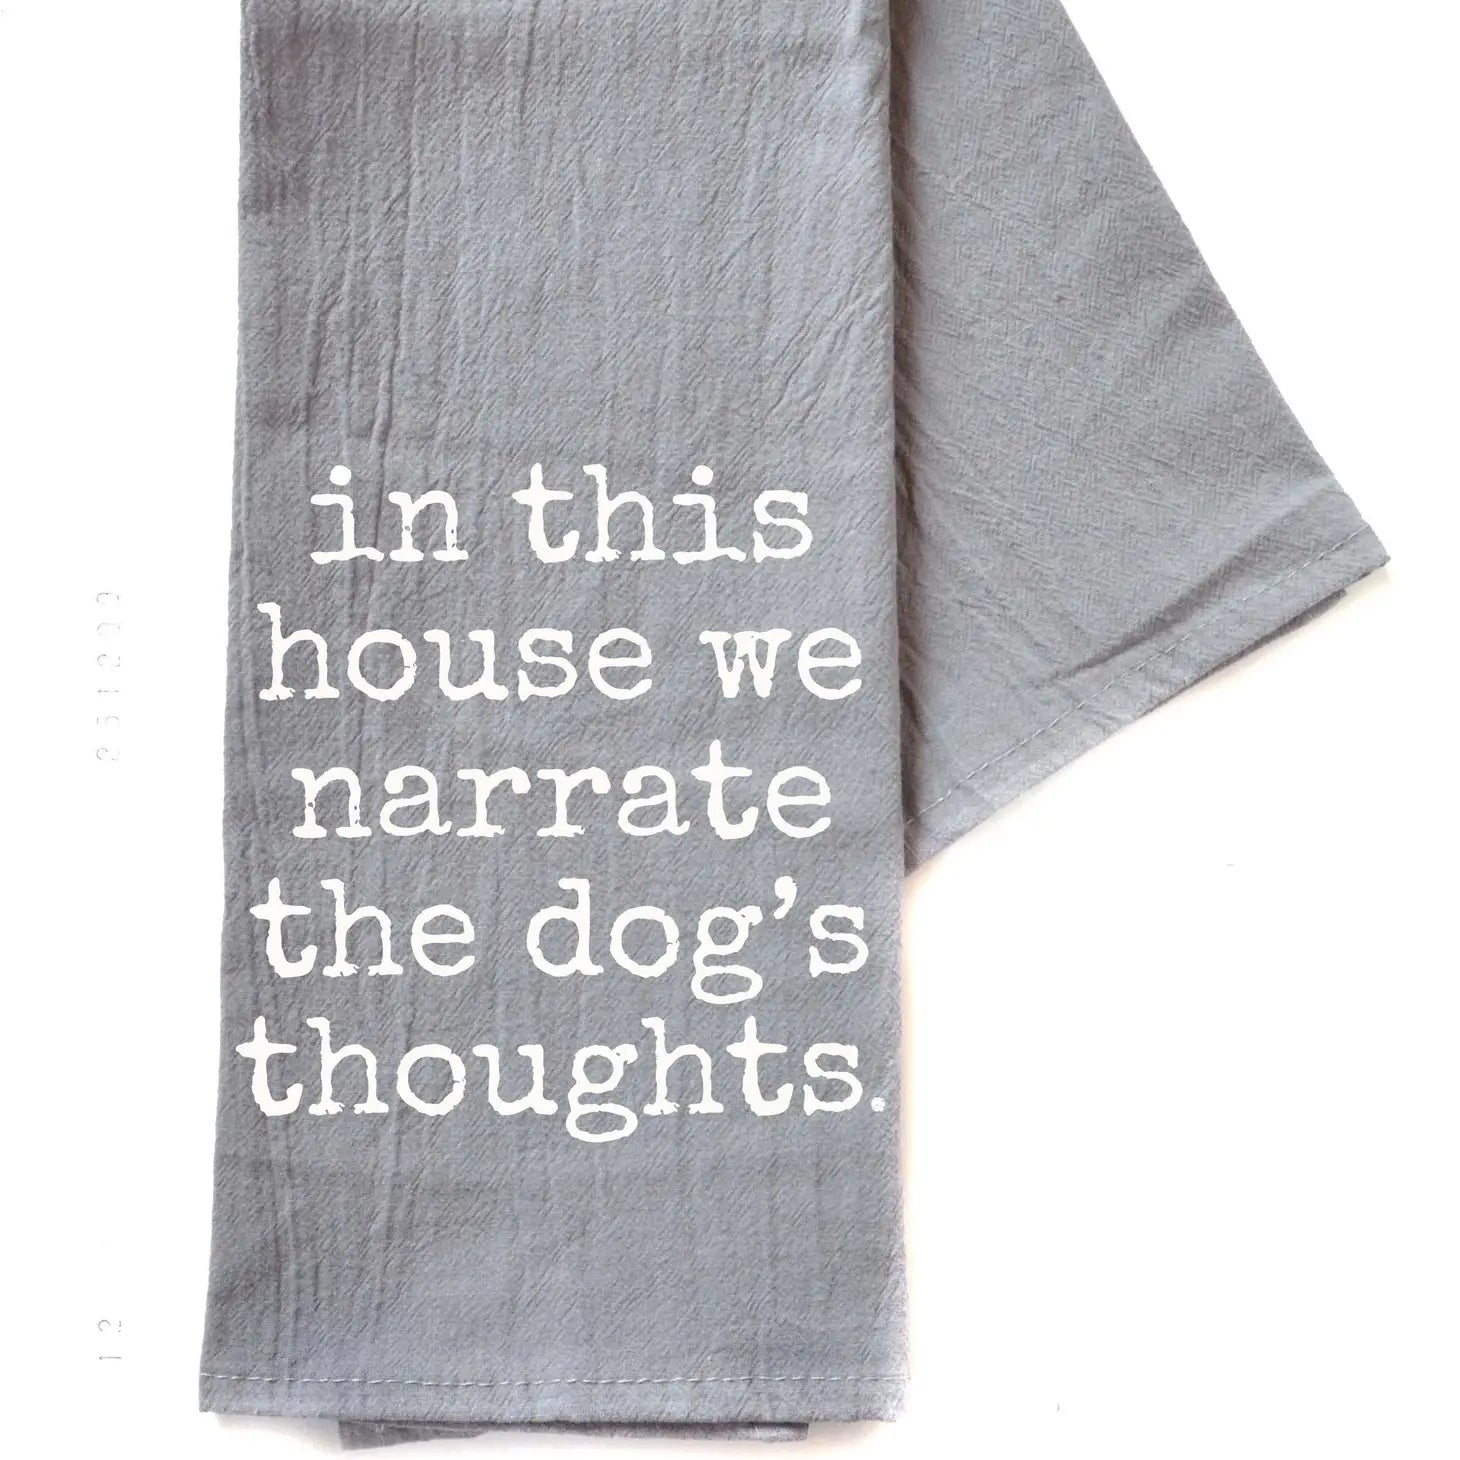 We Narrate the Dog’s Thoughts Towel